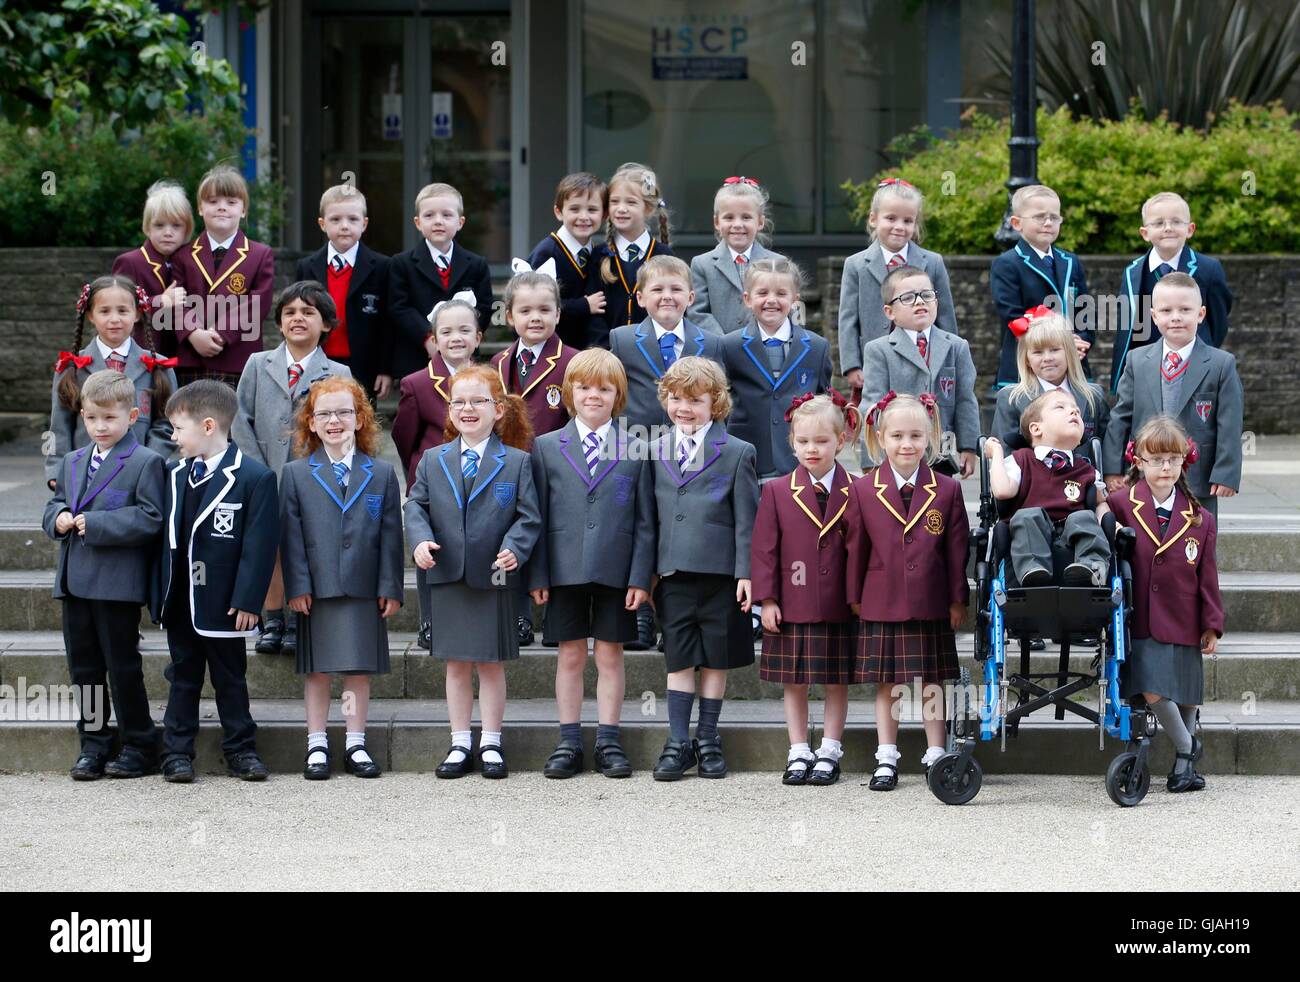 15 sets of twins, from the Inverclyde area, pose for a photograph in Clyde Square in Greenock, ahead of their first day at school. Pictured are (back row left to right) Emma and Grace McEleny (4), Fraser and Nathan McGrath (5), Jackson and Elizabeth Reid (5), Brooke and Skye Smith (4), Andrew and Thomas Stewart (4), (middle row left to right) Charlotte and Morgan Goyal (5), Orlagh and Niamh Keen (4), Charlie and Olivia Lyne (5), Cameron MacKenzie and Caitlin MacKenzie (NOT PICTURED) (4), Olivia and Rhogen McCurry (5), (front row left to right) Craig and Stuart Arthur (5), Caragh and Sophie Stock Photo